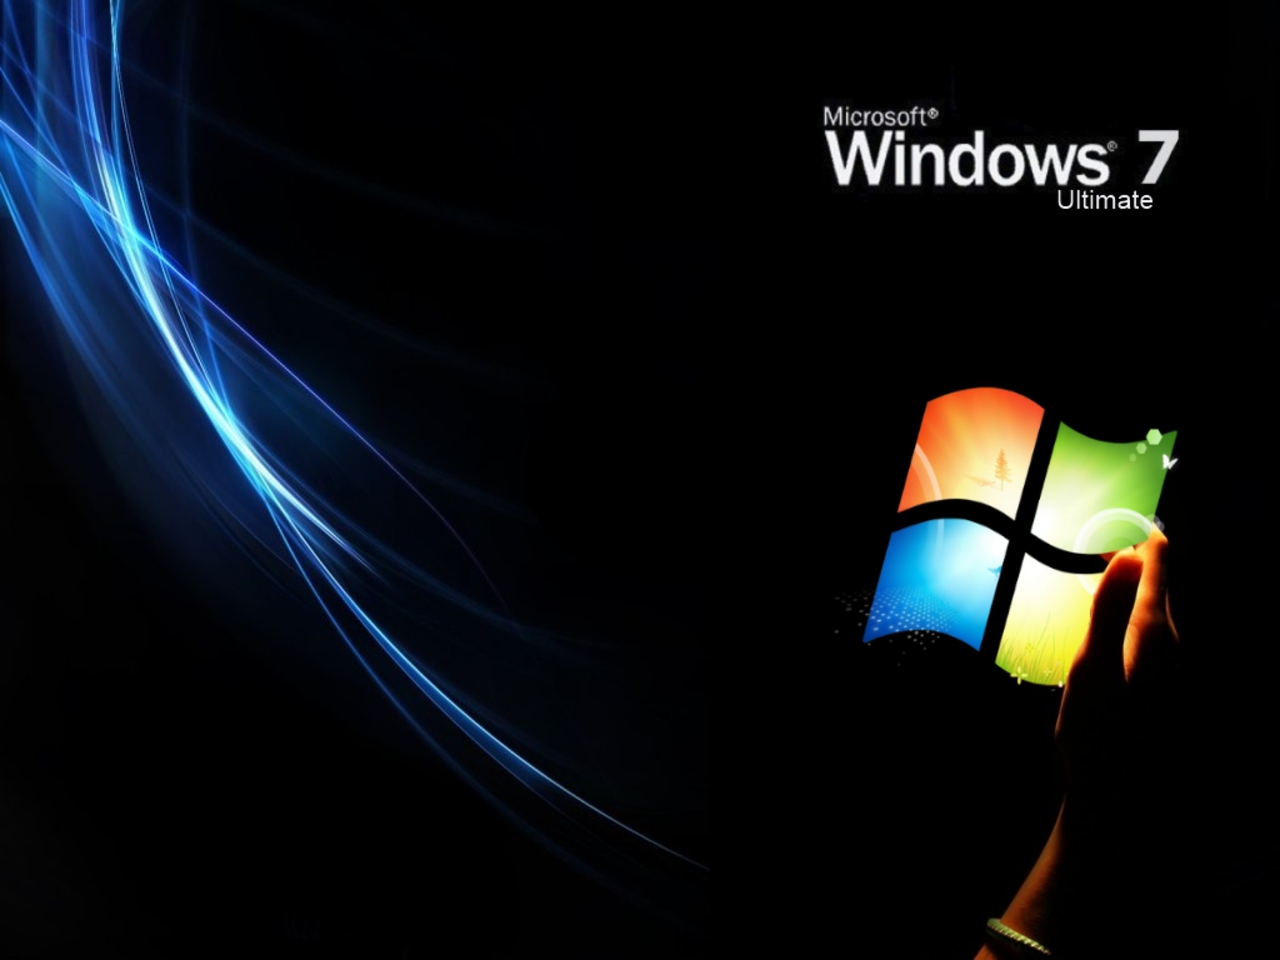  hd  wallpapers  of windows  7  ultimate Unique Things